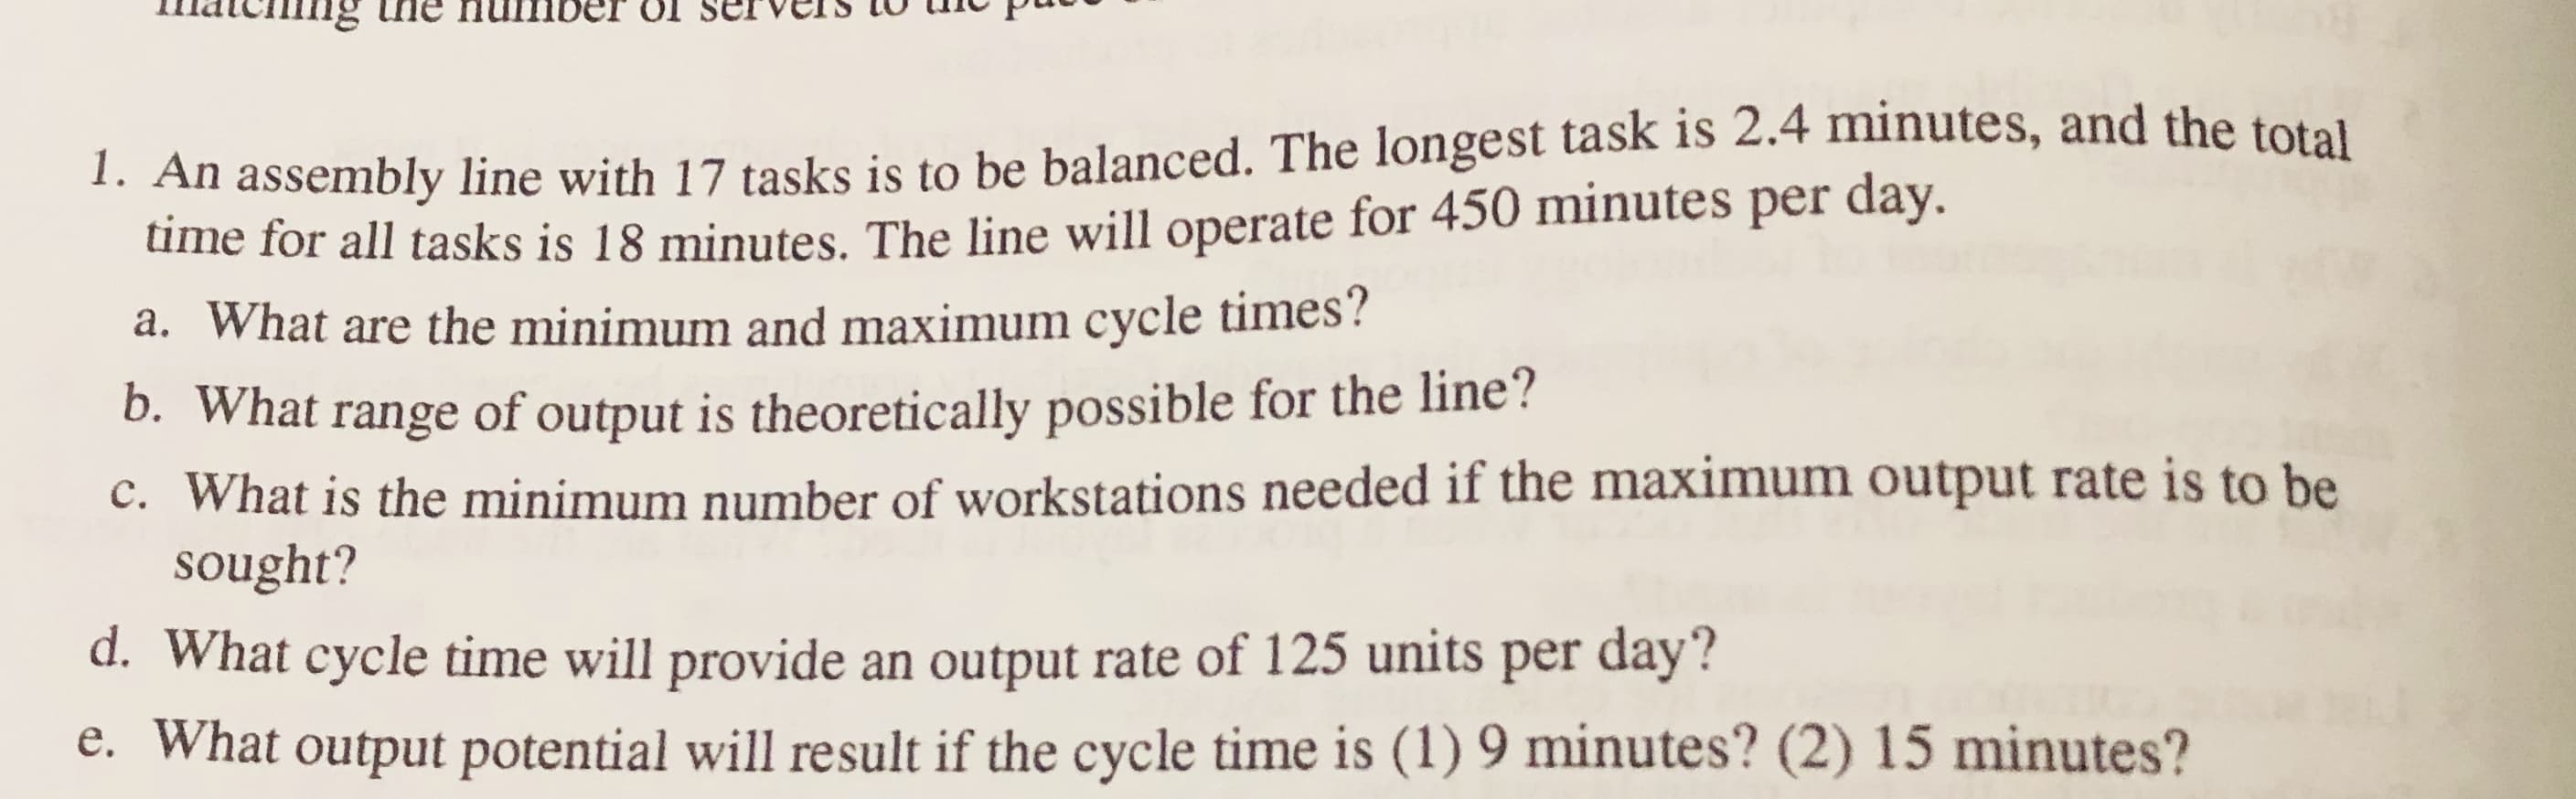 1. An assembly line with 17 tasks is to be balanced. The longest task is 2.4 minutes, and the total
time for all tasks is 18 minutes. The line will operate for 450 minutes per day.
a. What are the minimum and maximum cycle times?
D. What range of output is theoretically possible for the line?
c. What is the minimum number of workstations needed if the maximum output rate is to be
sought?
